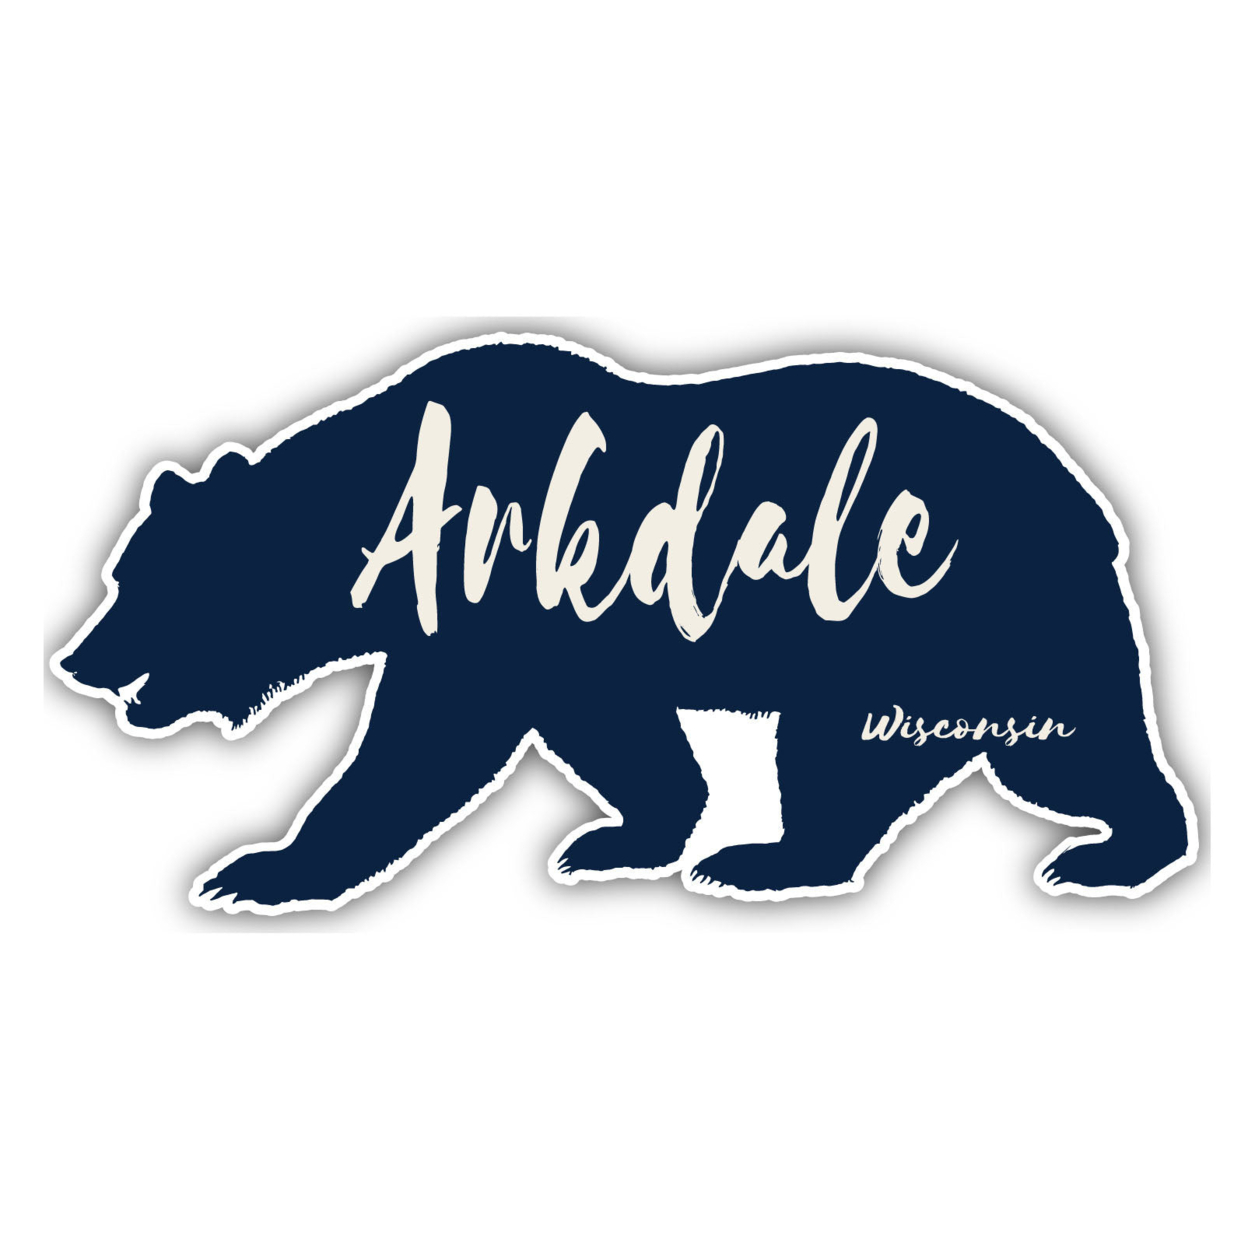 Arkdale Wisconsin Souvenir Decorative Stickers (Choose Theme And Size) - 4-Pack, 10-Inch, Bear